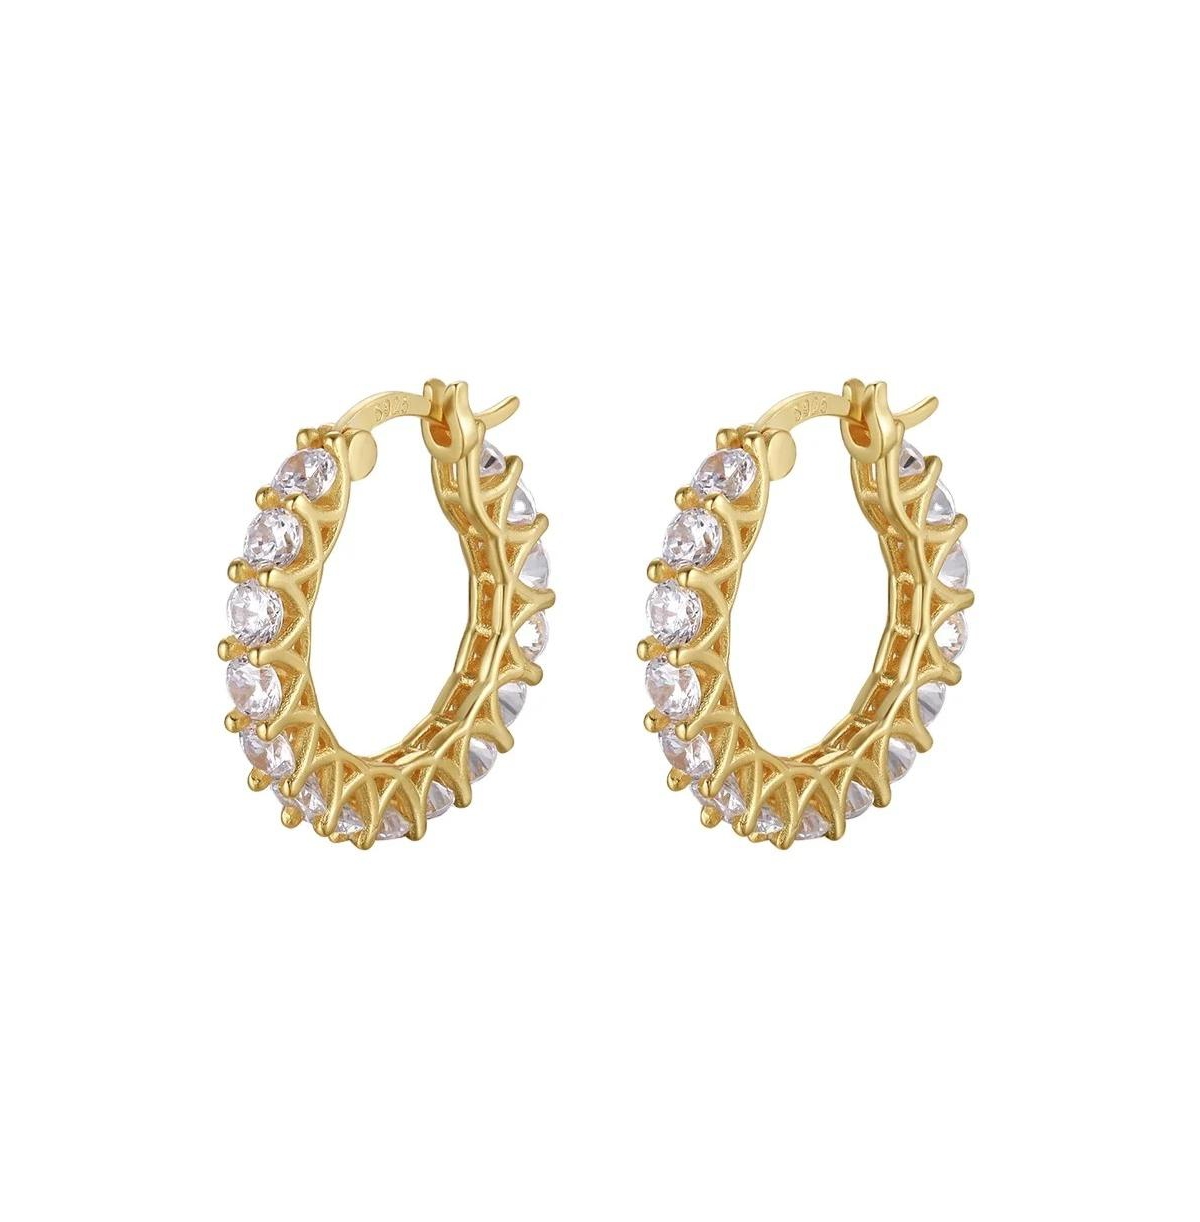 Gold Huggie Hoop Earrings Embellished with Sparkling Cubic Zirconia - Gold